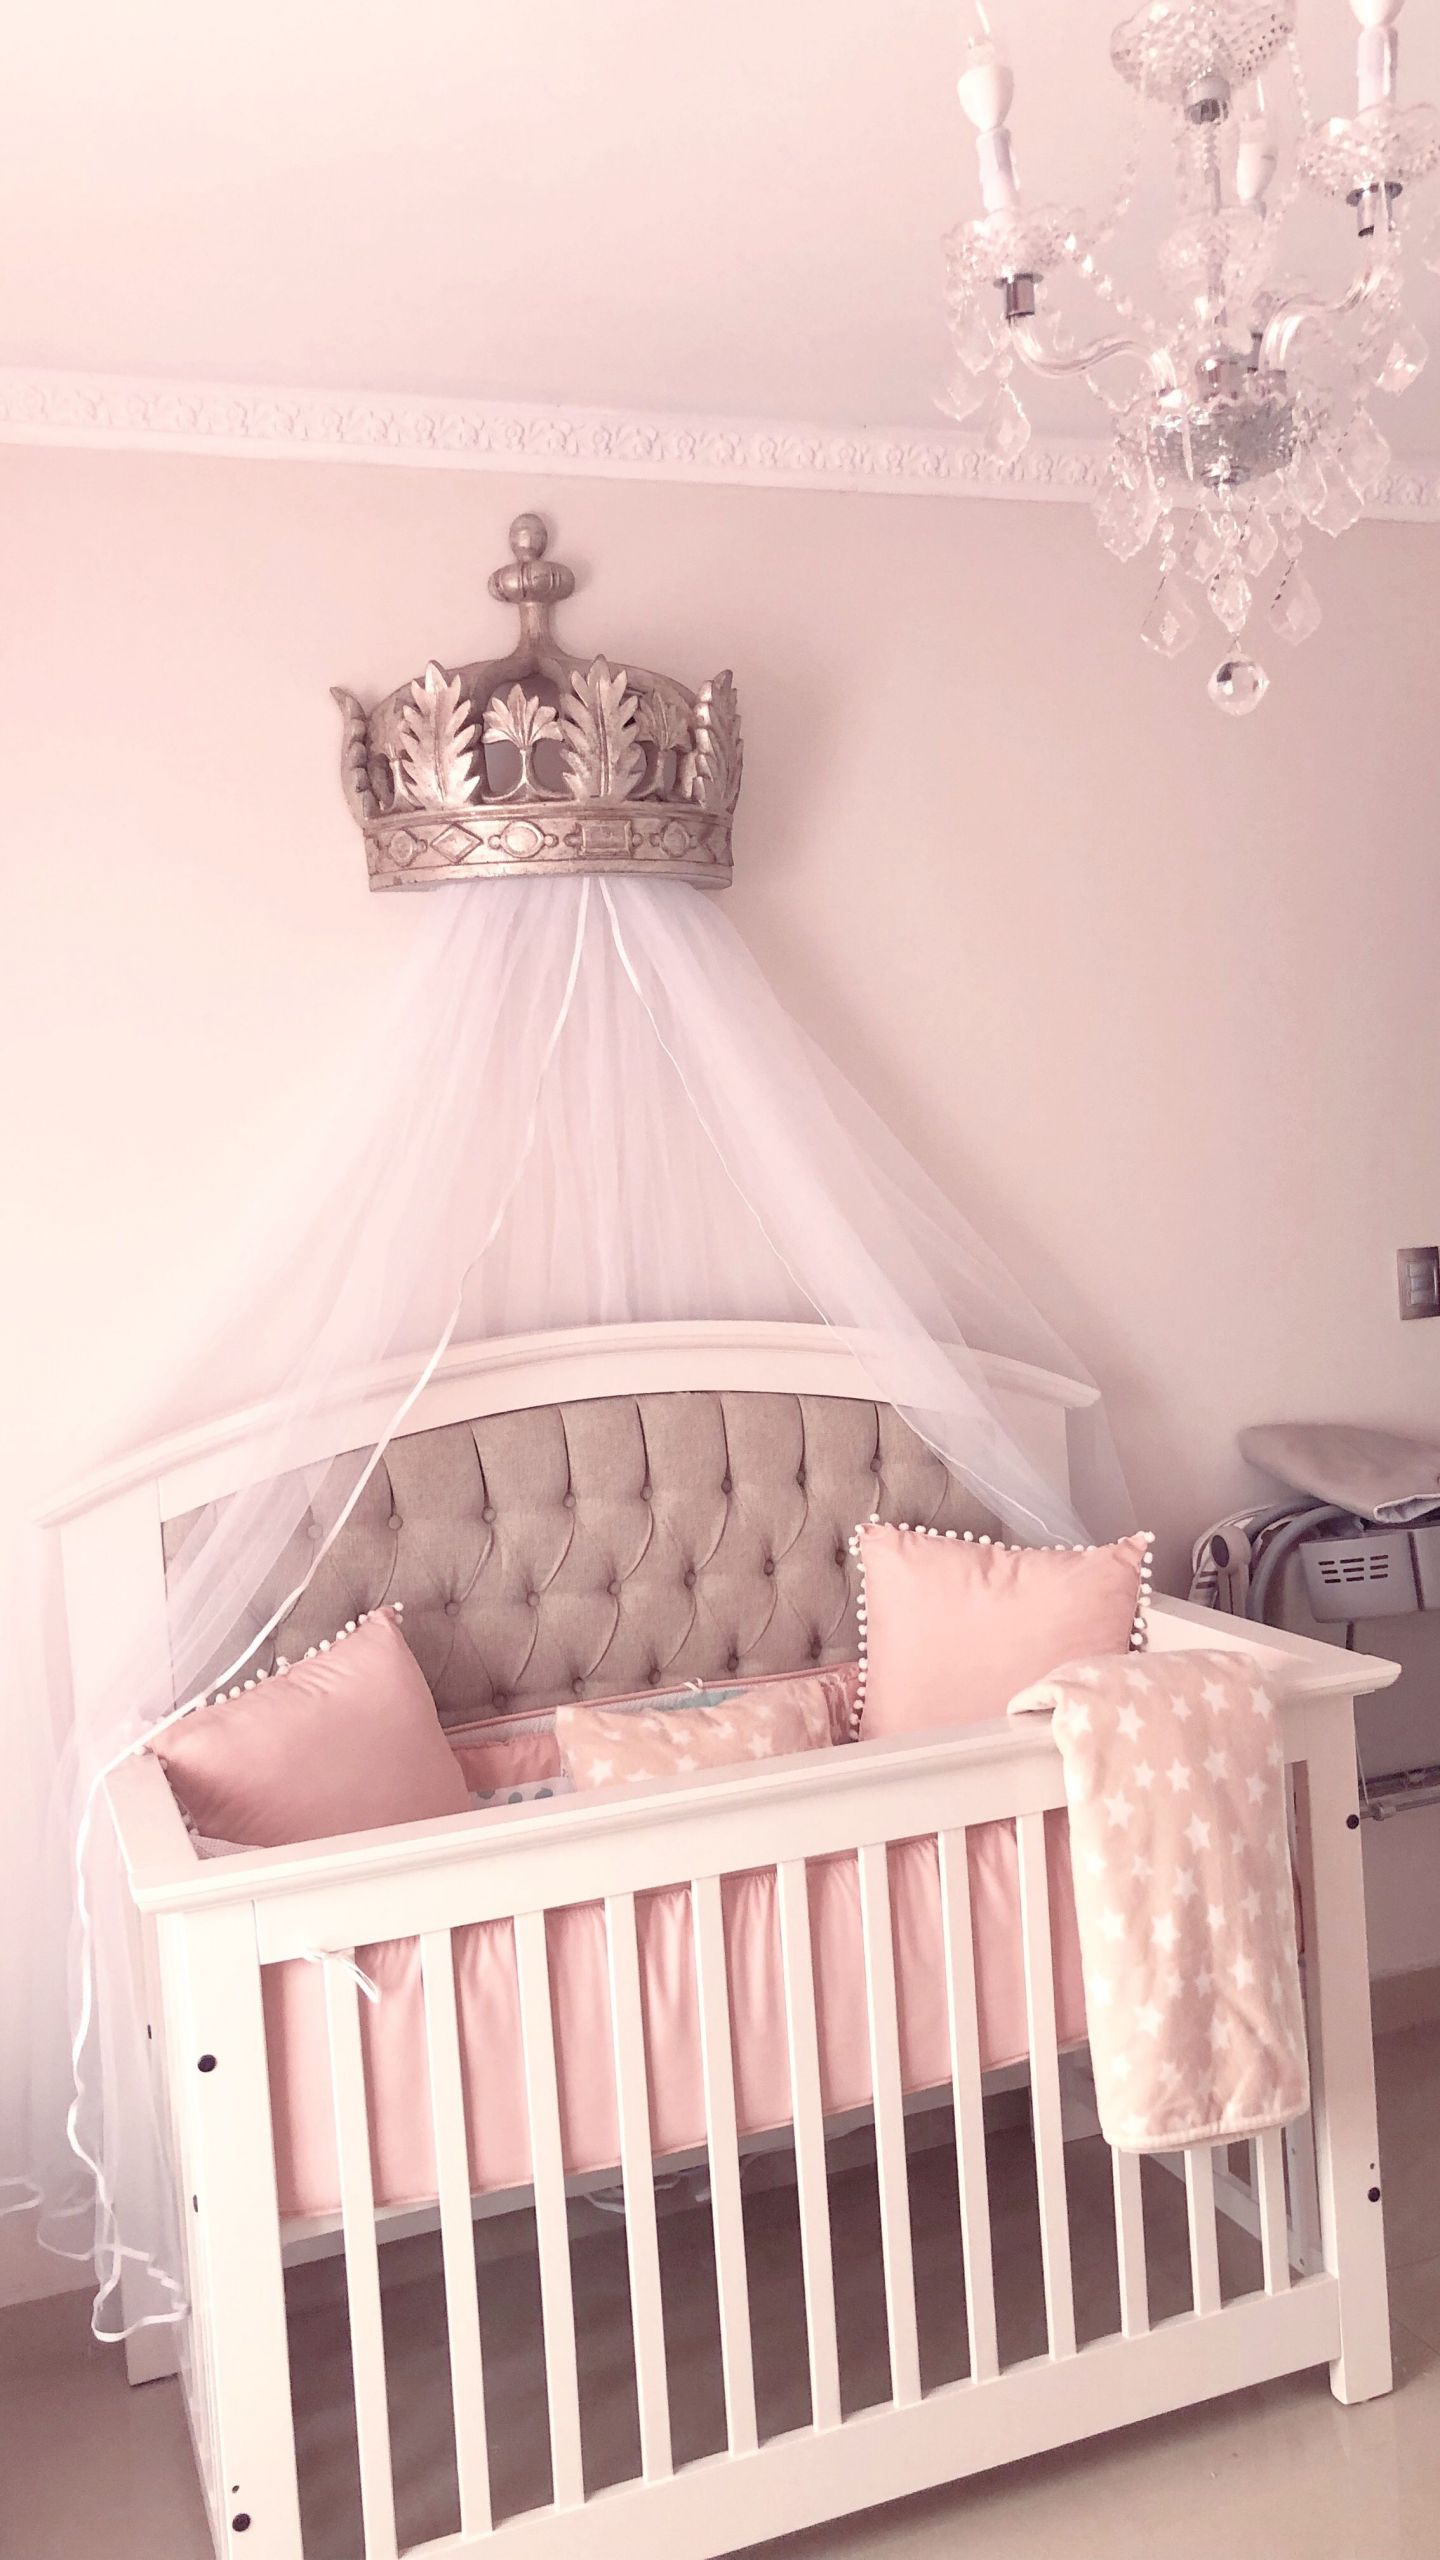 Crown Decor For Baby Room
 Crown canopy from restoration hardware princess nursery